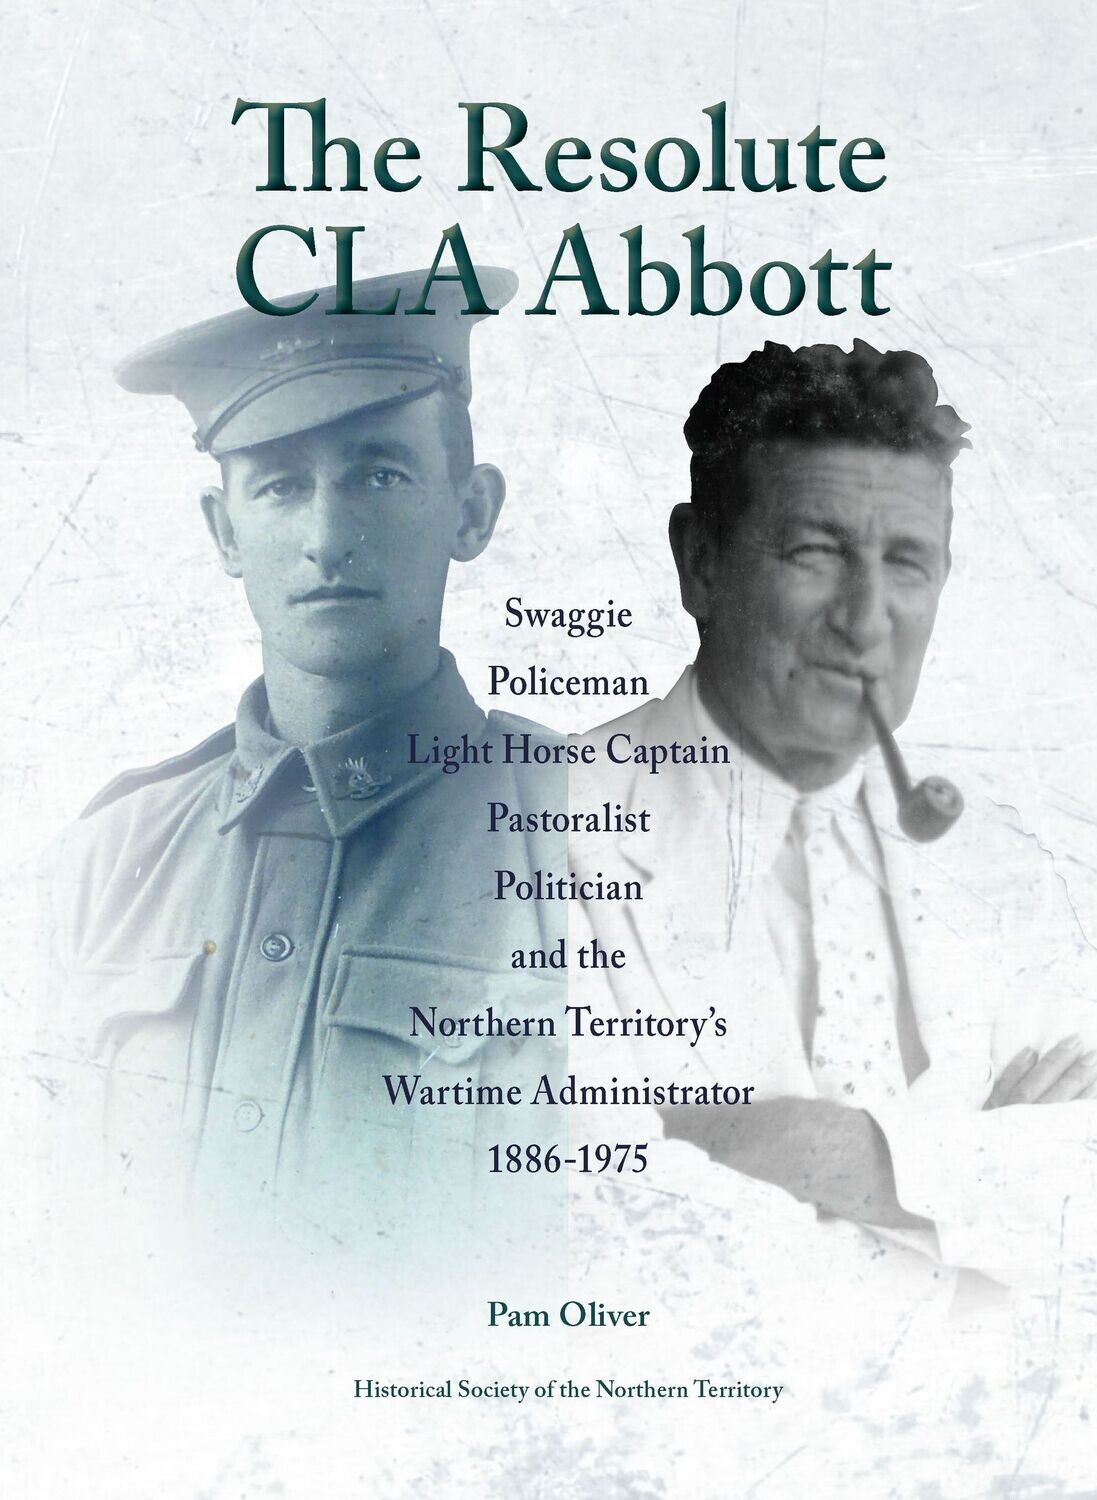 The Resolute CLA Abbott: Swaggie, Policeman, Light Horse Captain, Pastoralist, Politician and the Northern Territory's Wartime Administrator 1886-1975